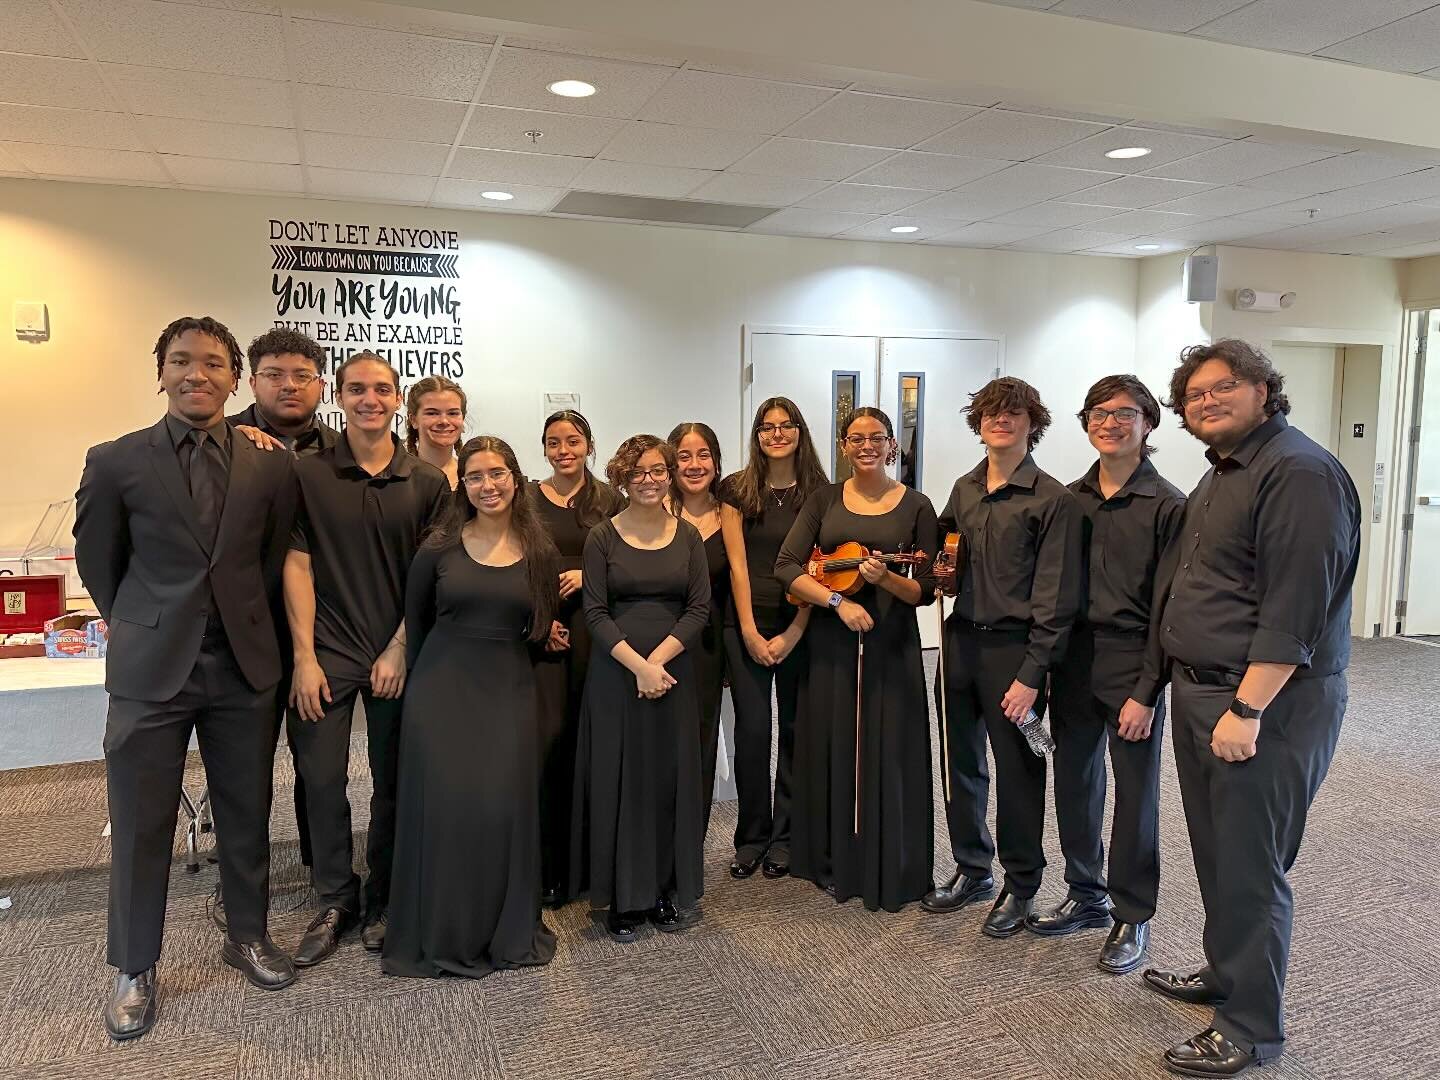 Great job to the orchestra students and alumni who came out to play in the Naples 200 this weekend! It was a great time and Mr. Bigler even tried his hand at playing violin!